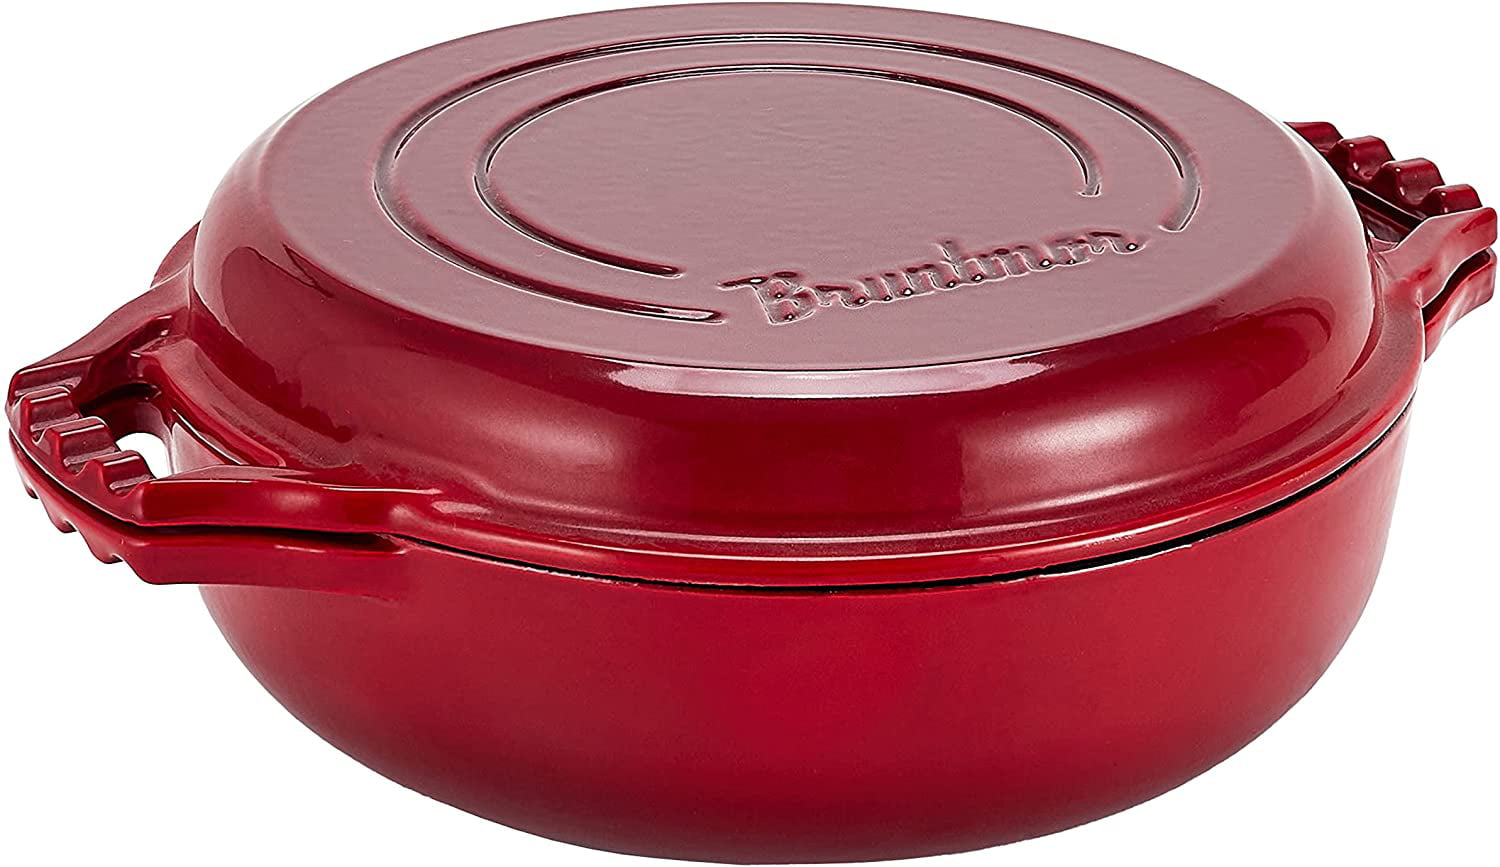 2-in-1 Enameled Cast Iron Cocotte Double Braiser Pan with Grill 